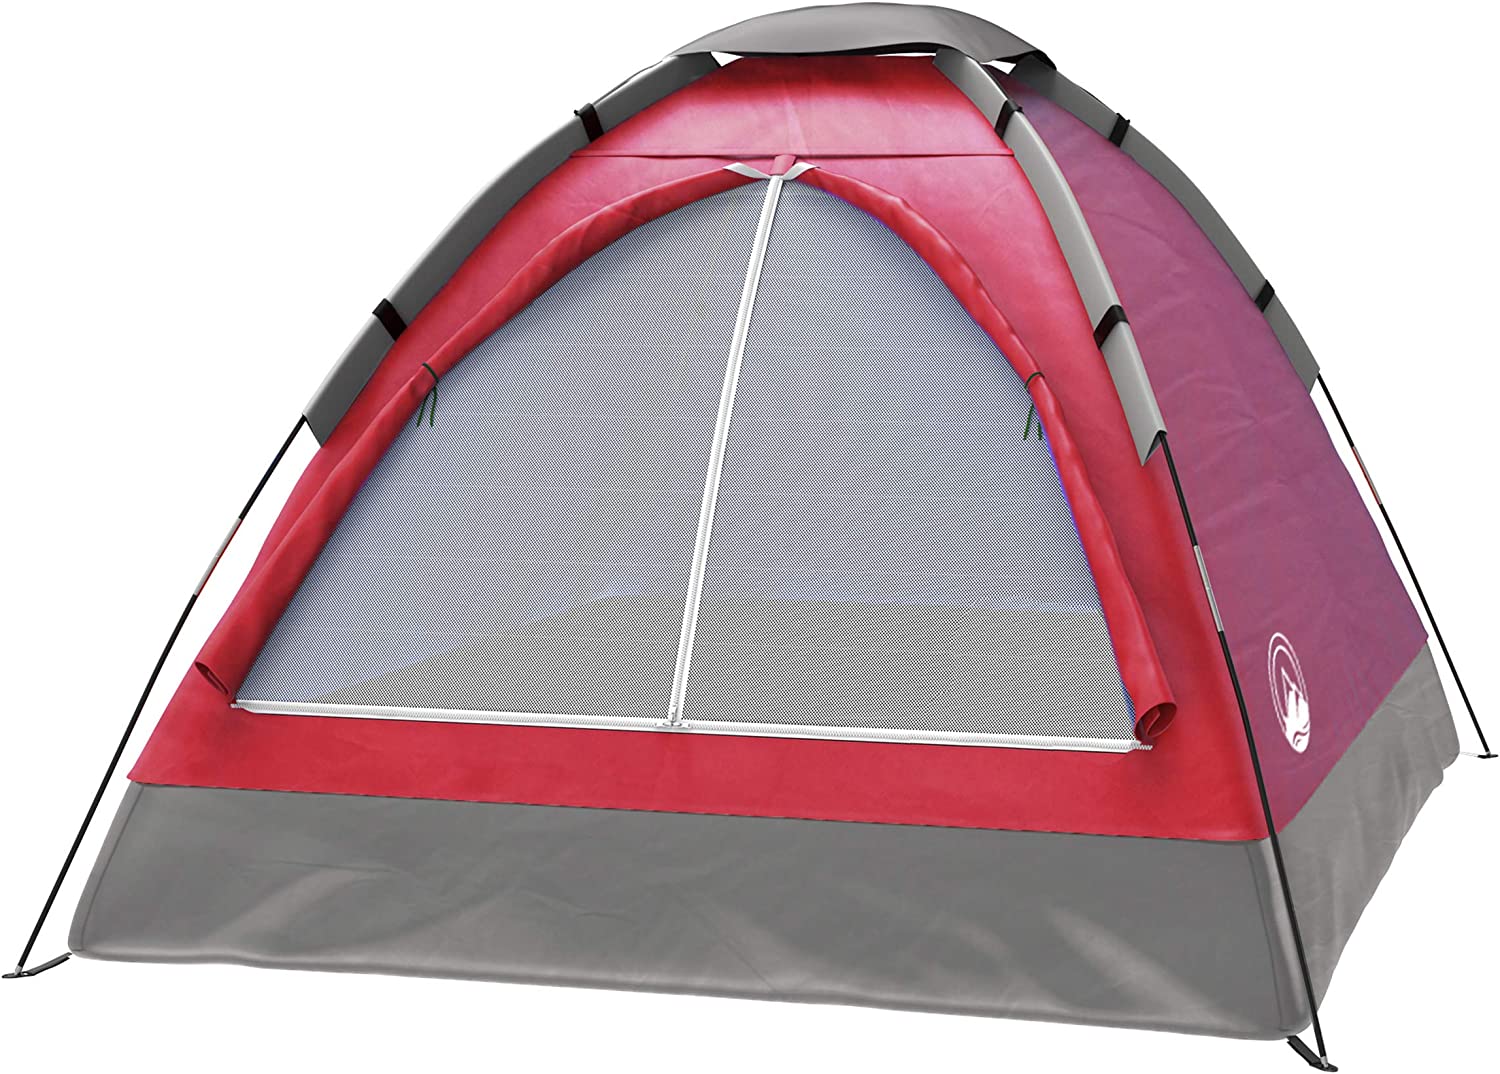 2-Person Dome Tent with Camping Accessories – Including Rain Fly and Carry Bag in Red – by Wakeman Outdoors